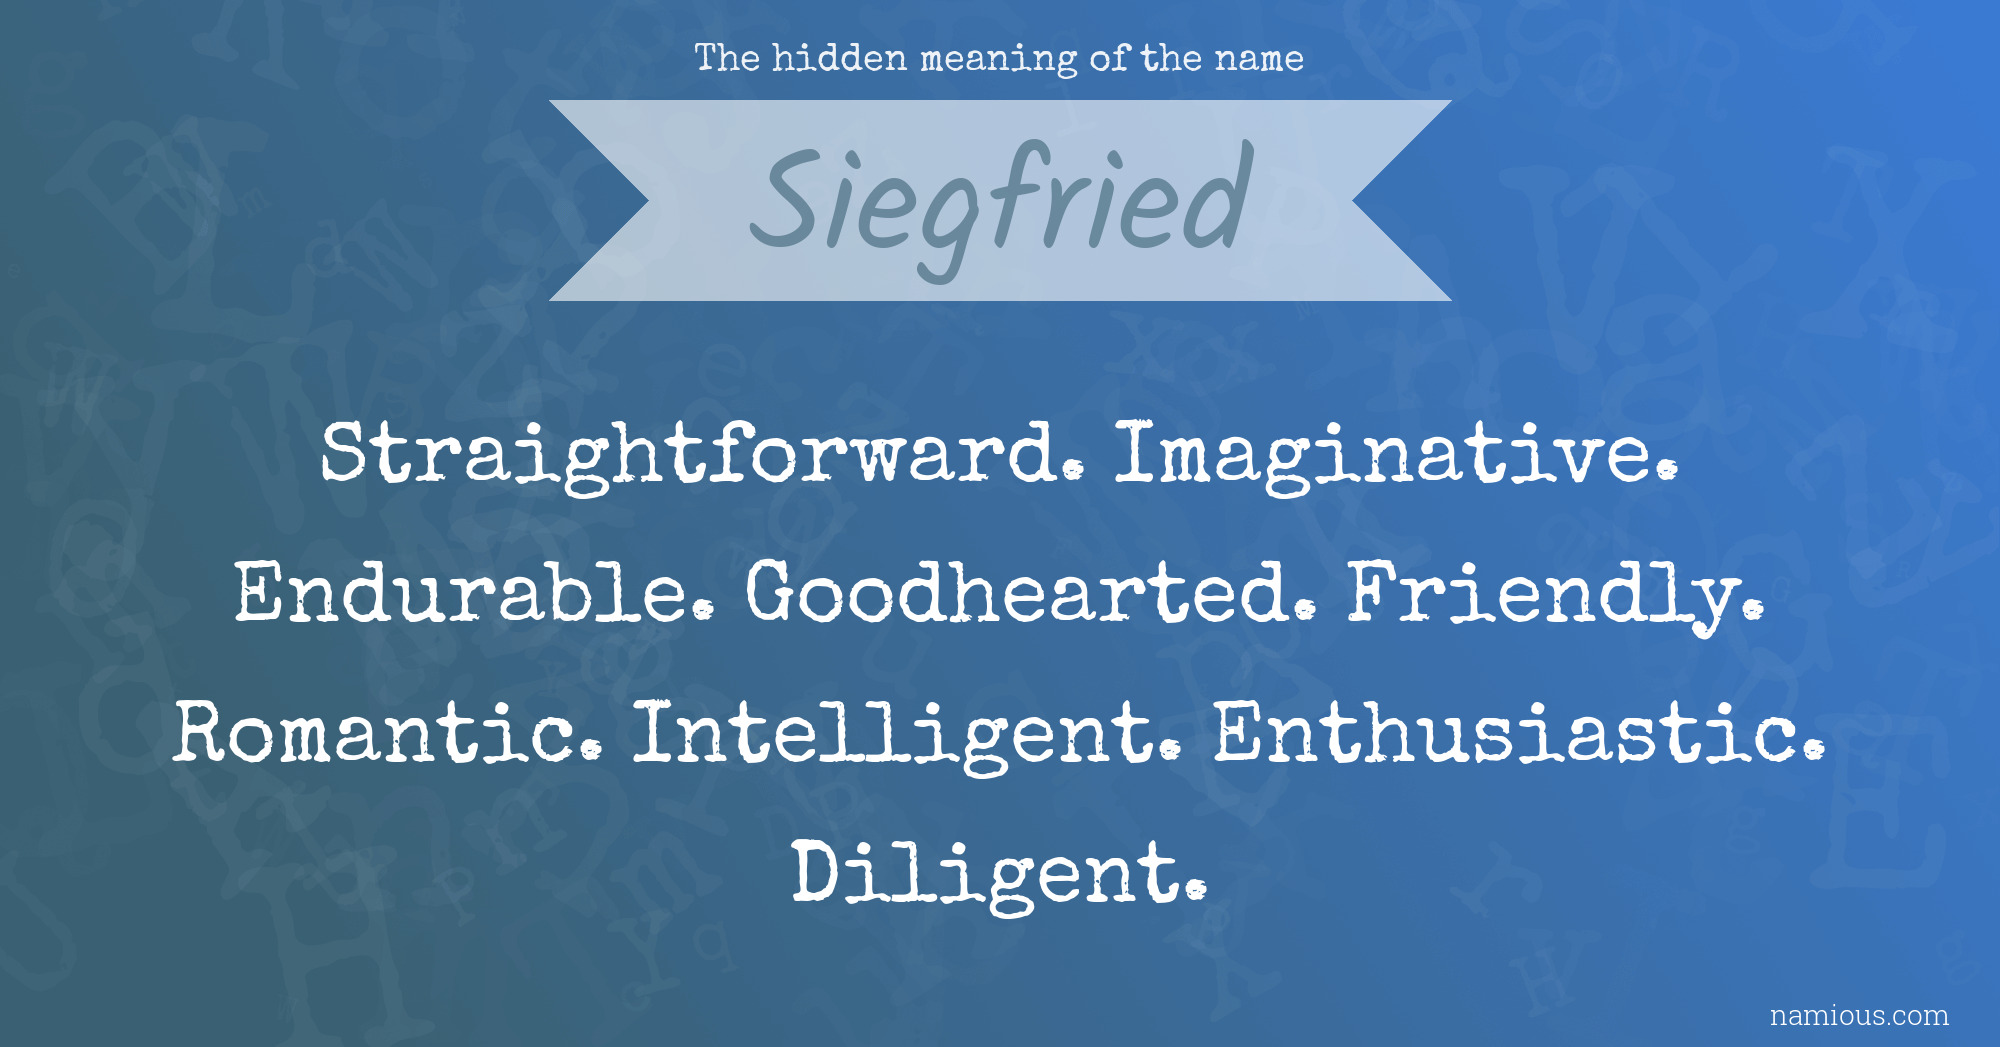 The hidden meaning of the name Siegfried